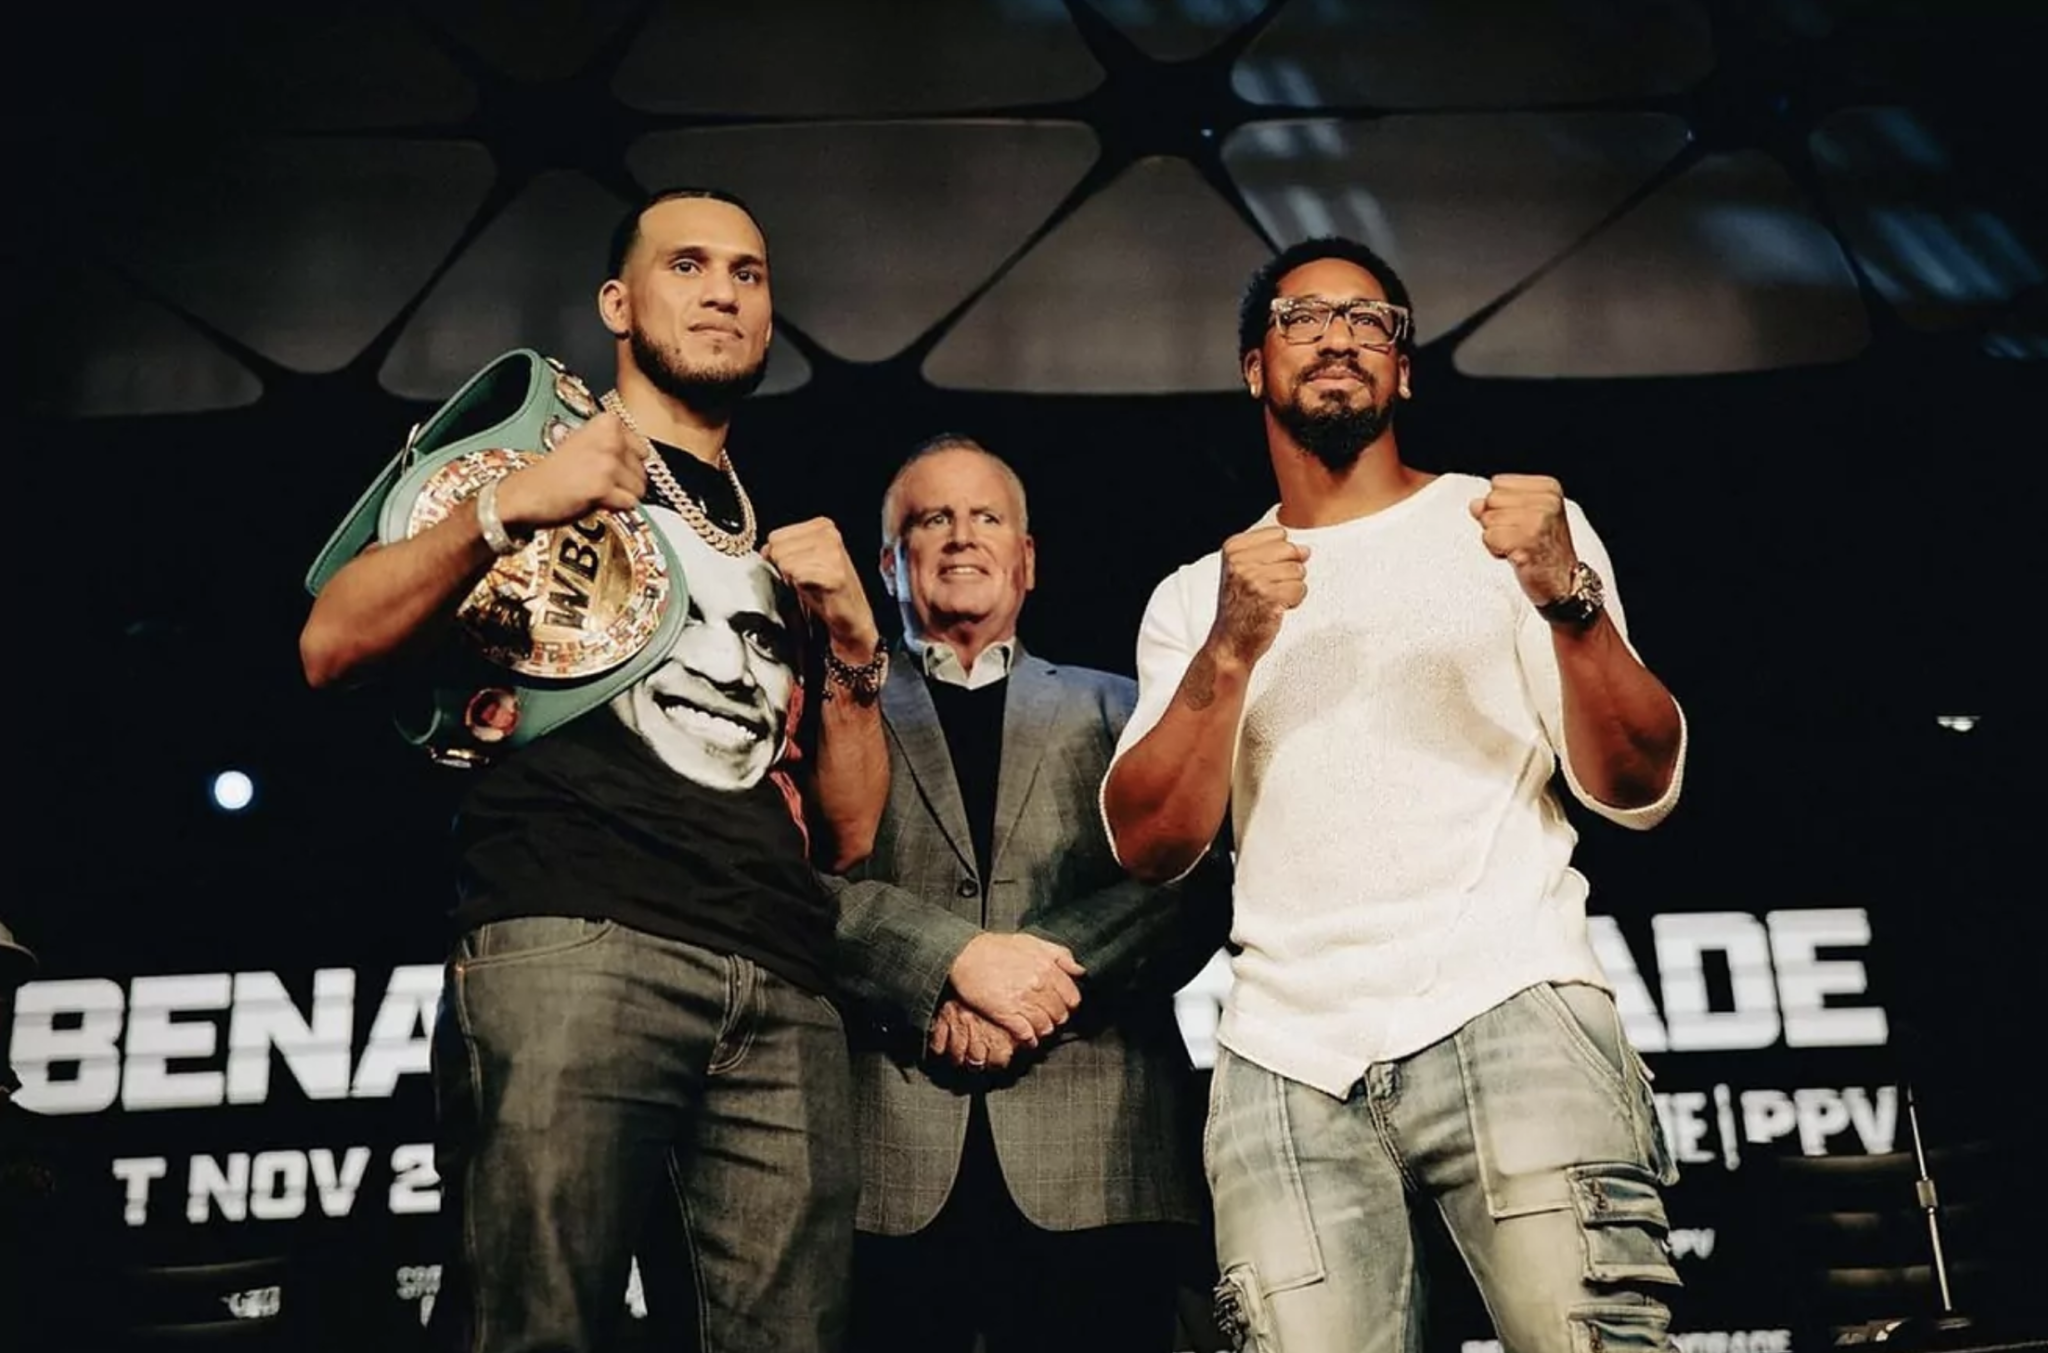 David Benavidez vs Demetrius Andrade Prediction: Who is more likely to win this weekend?